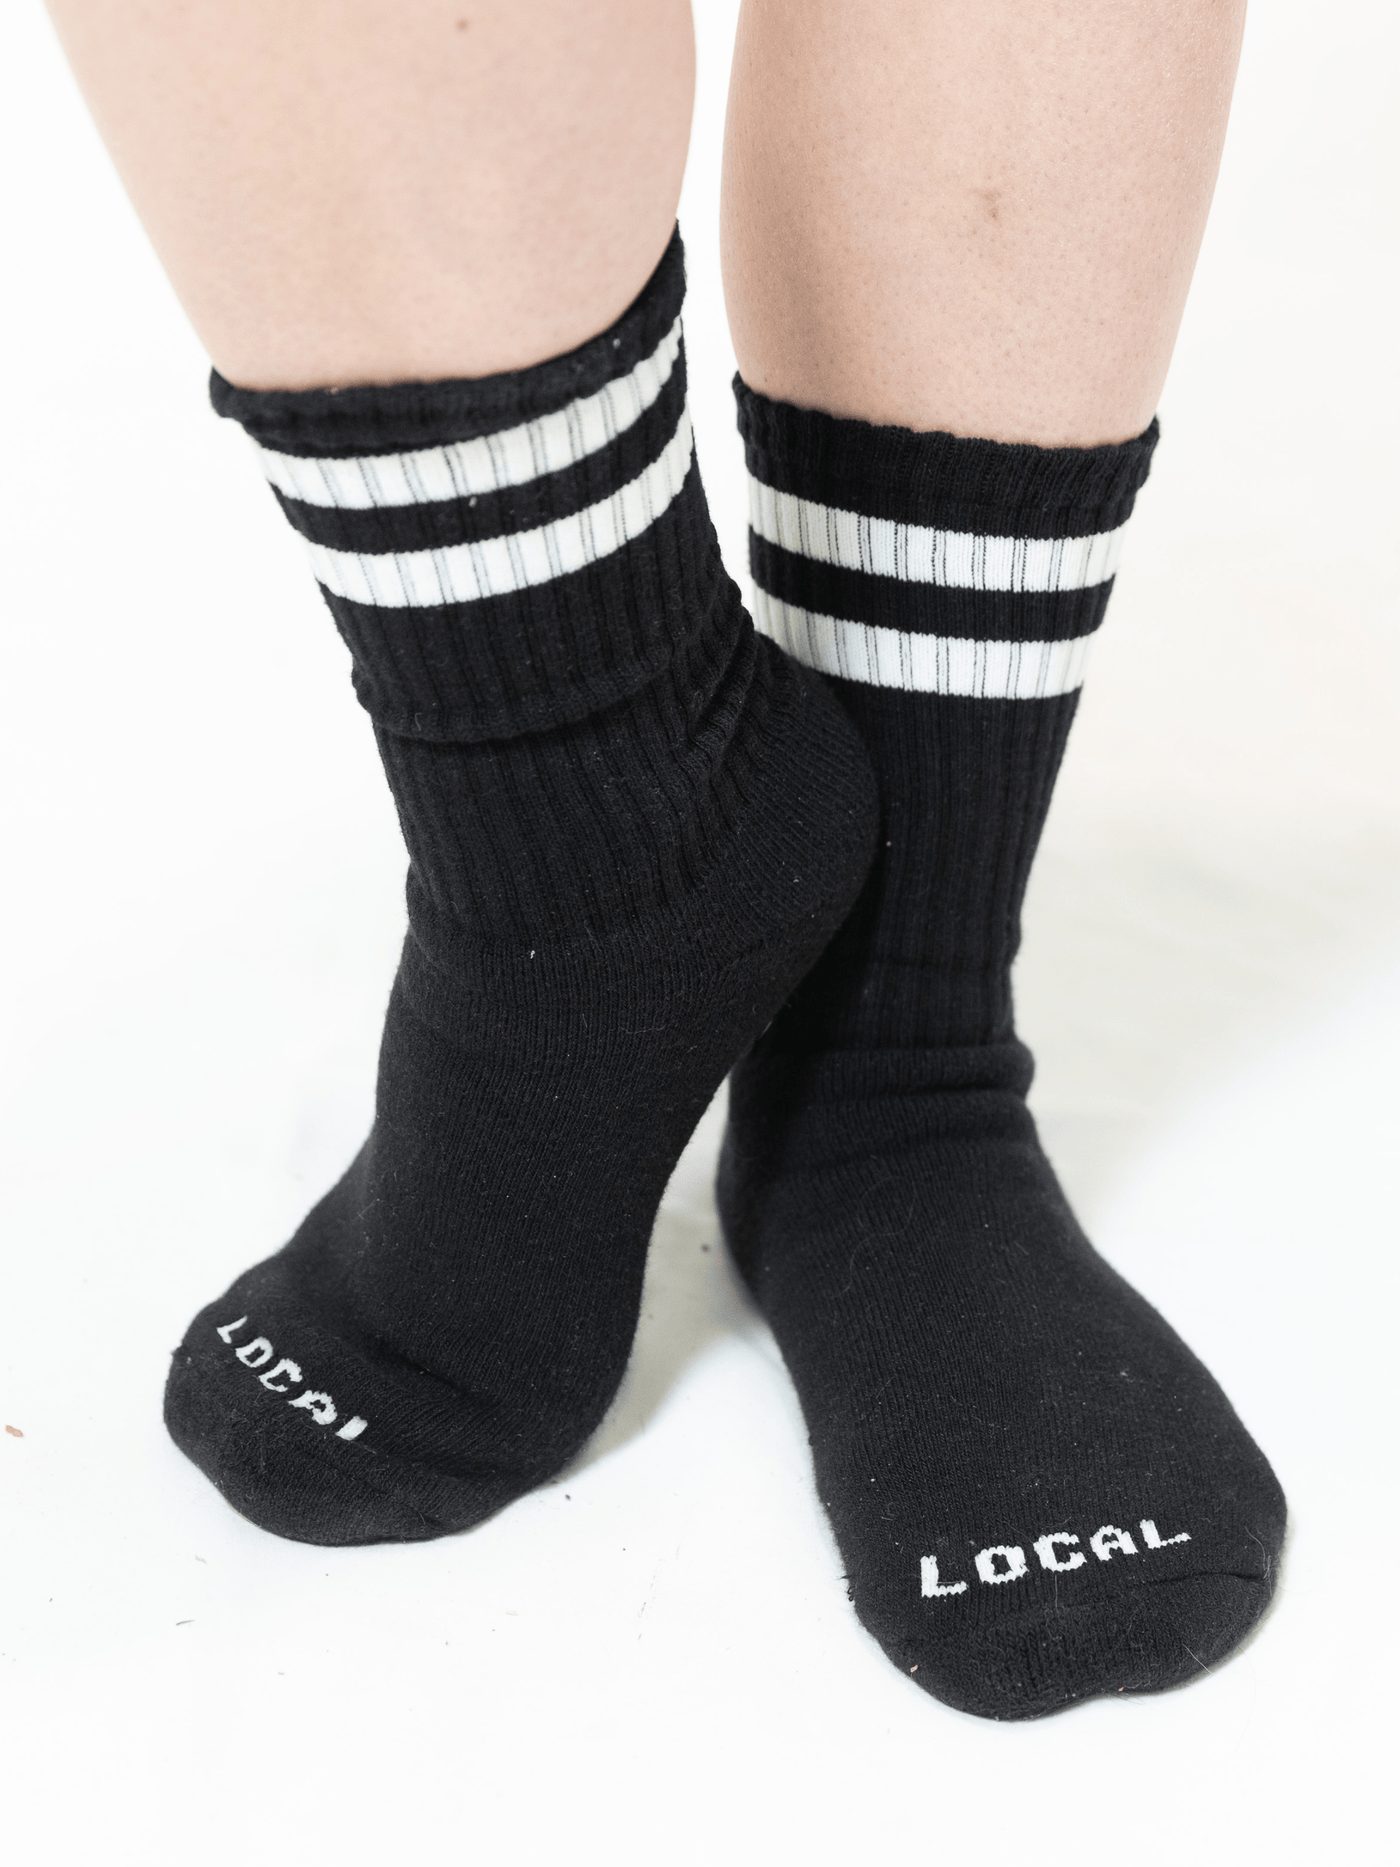 Local Laundry Giving Sock in Black with White contrast stripes. Every purchase of these socks goes towards giving socks to those in need 